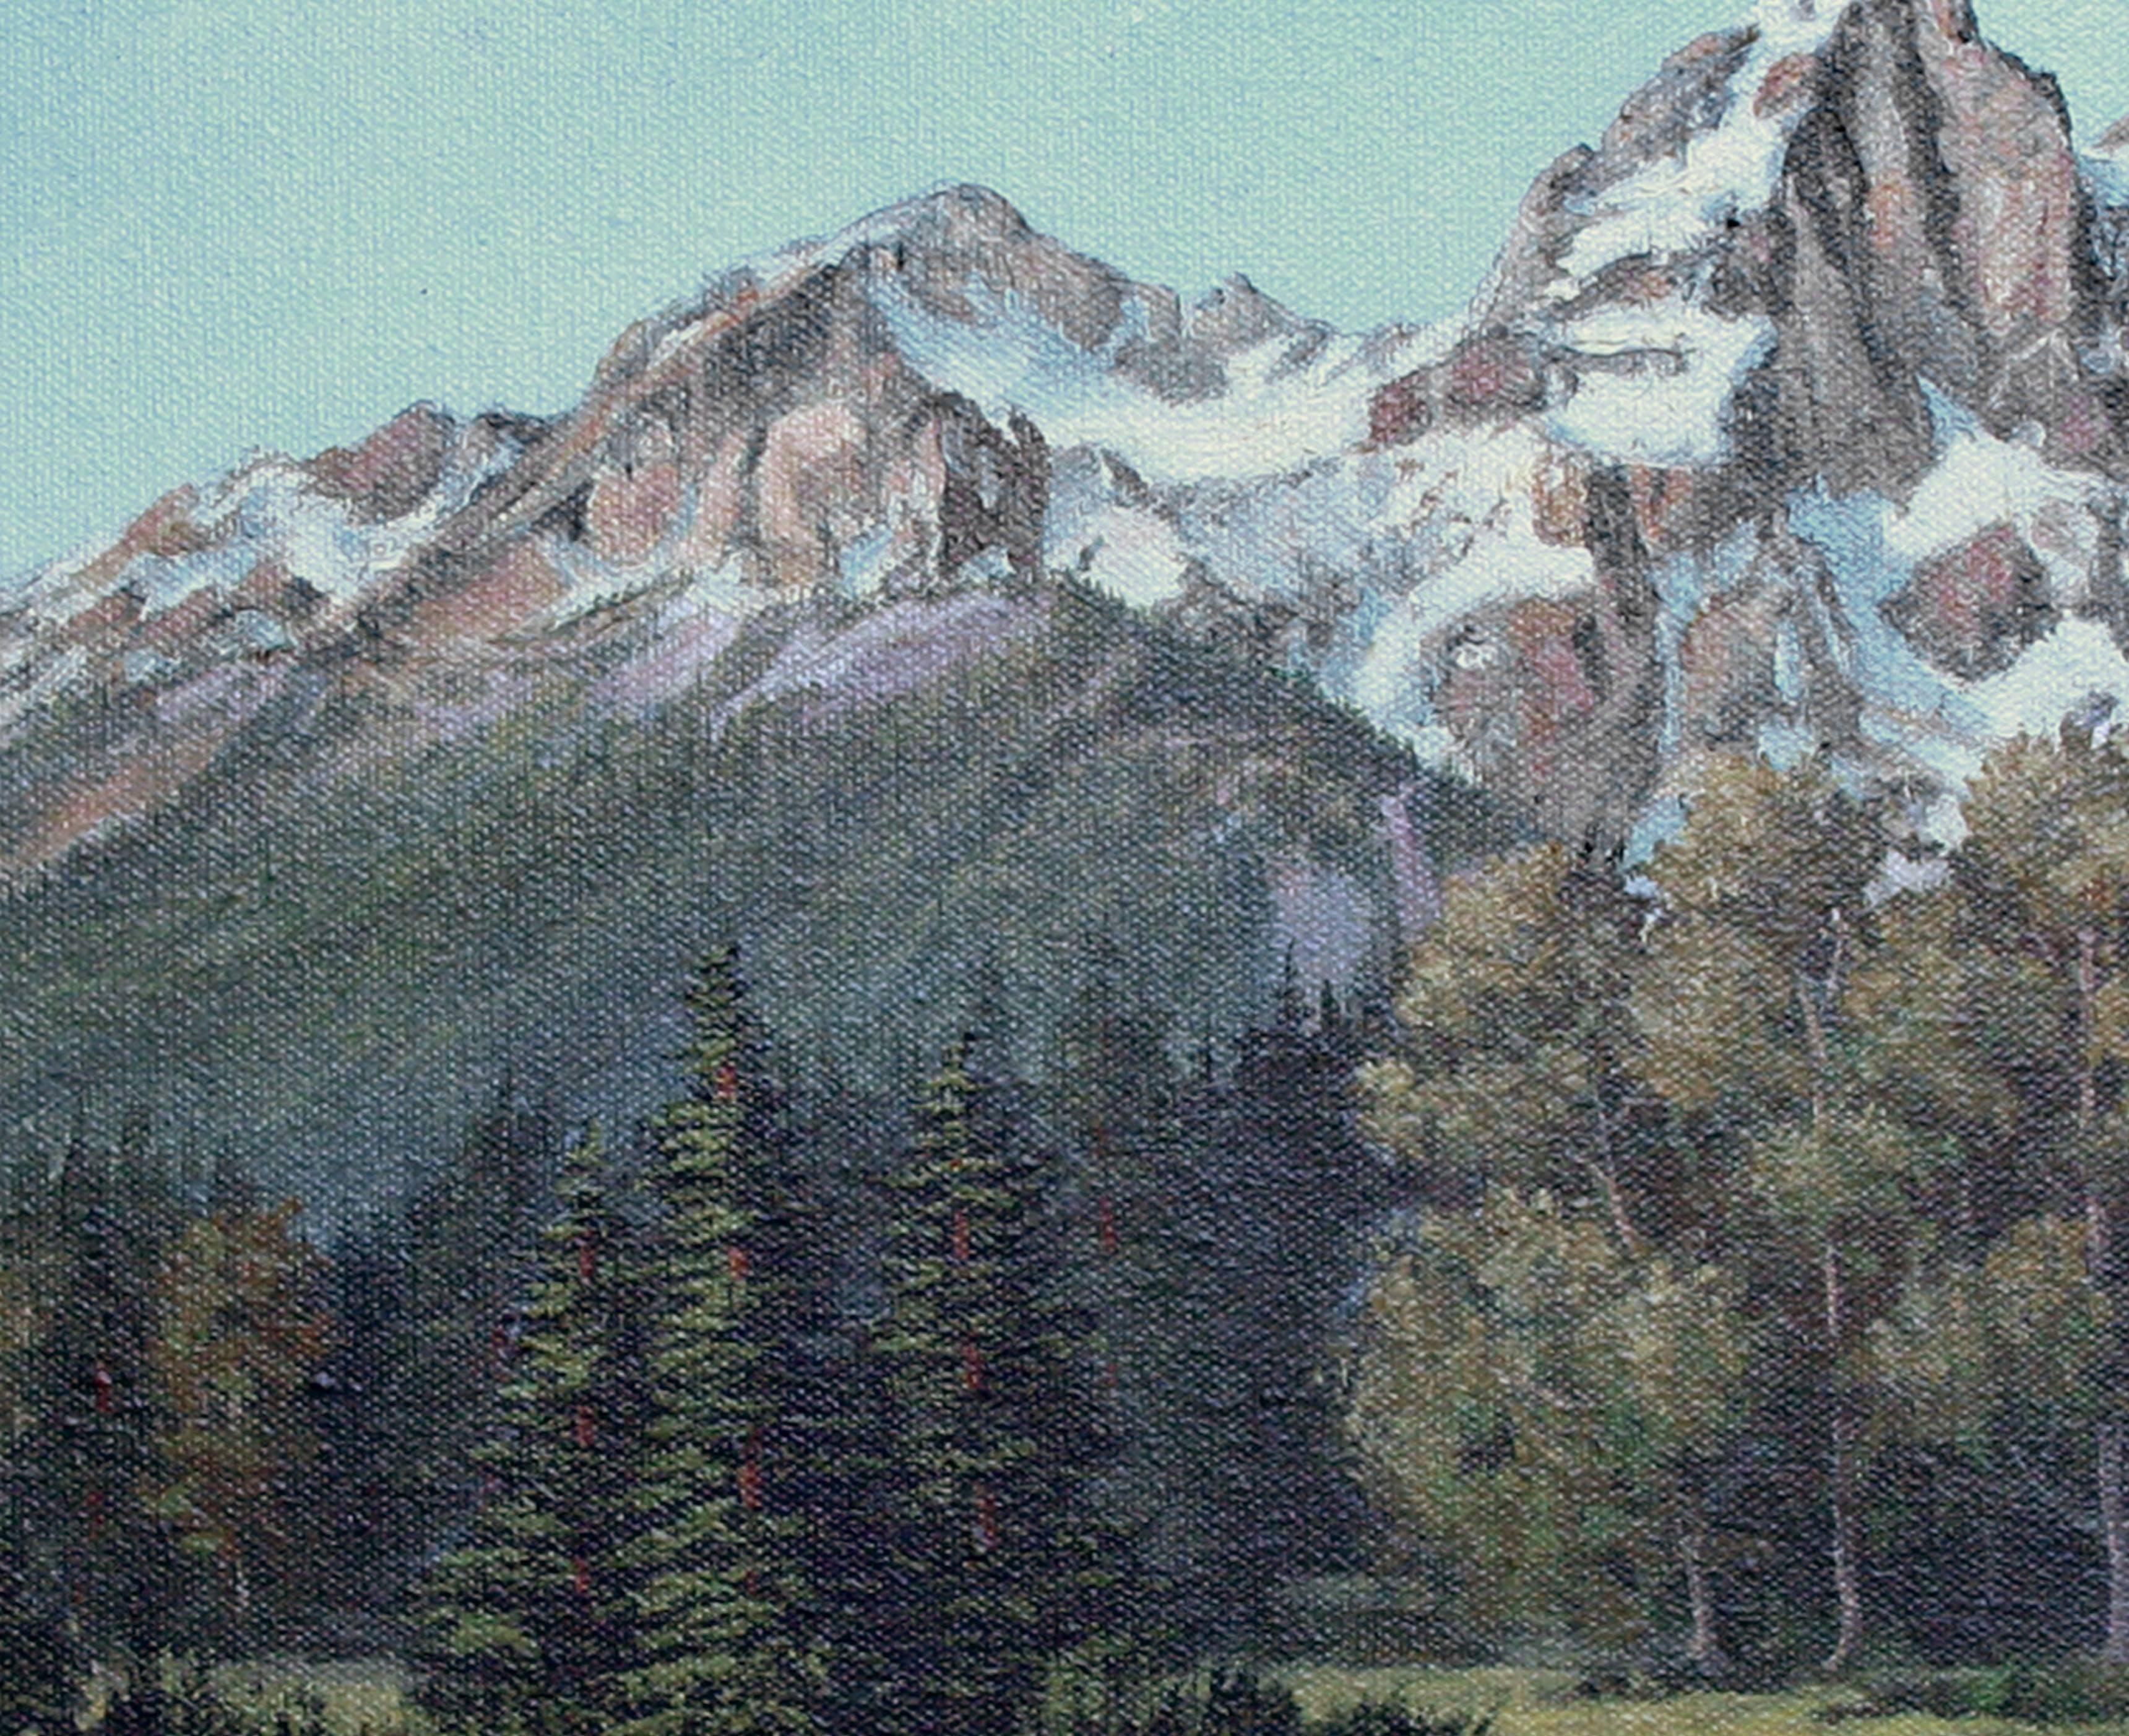 Mid Century California Mountaintops Forest Landscape by Joseph Frey

Beautiful and serene mid-century landscape of snowy California mountaintops by listed California artist Joseph Frey (American, 1892 - 1977). The dramatic peaks tower over a glassy